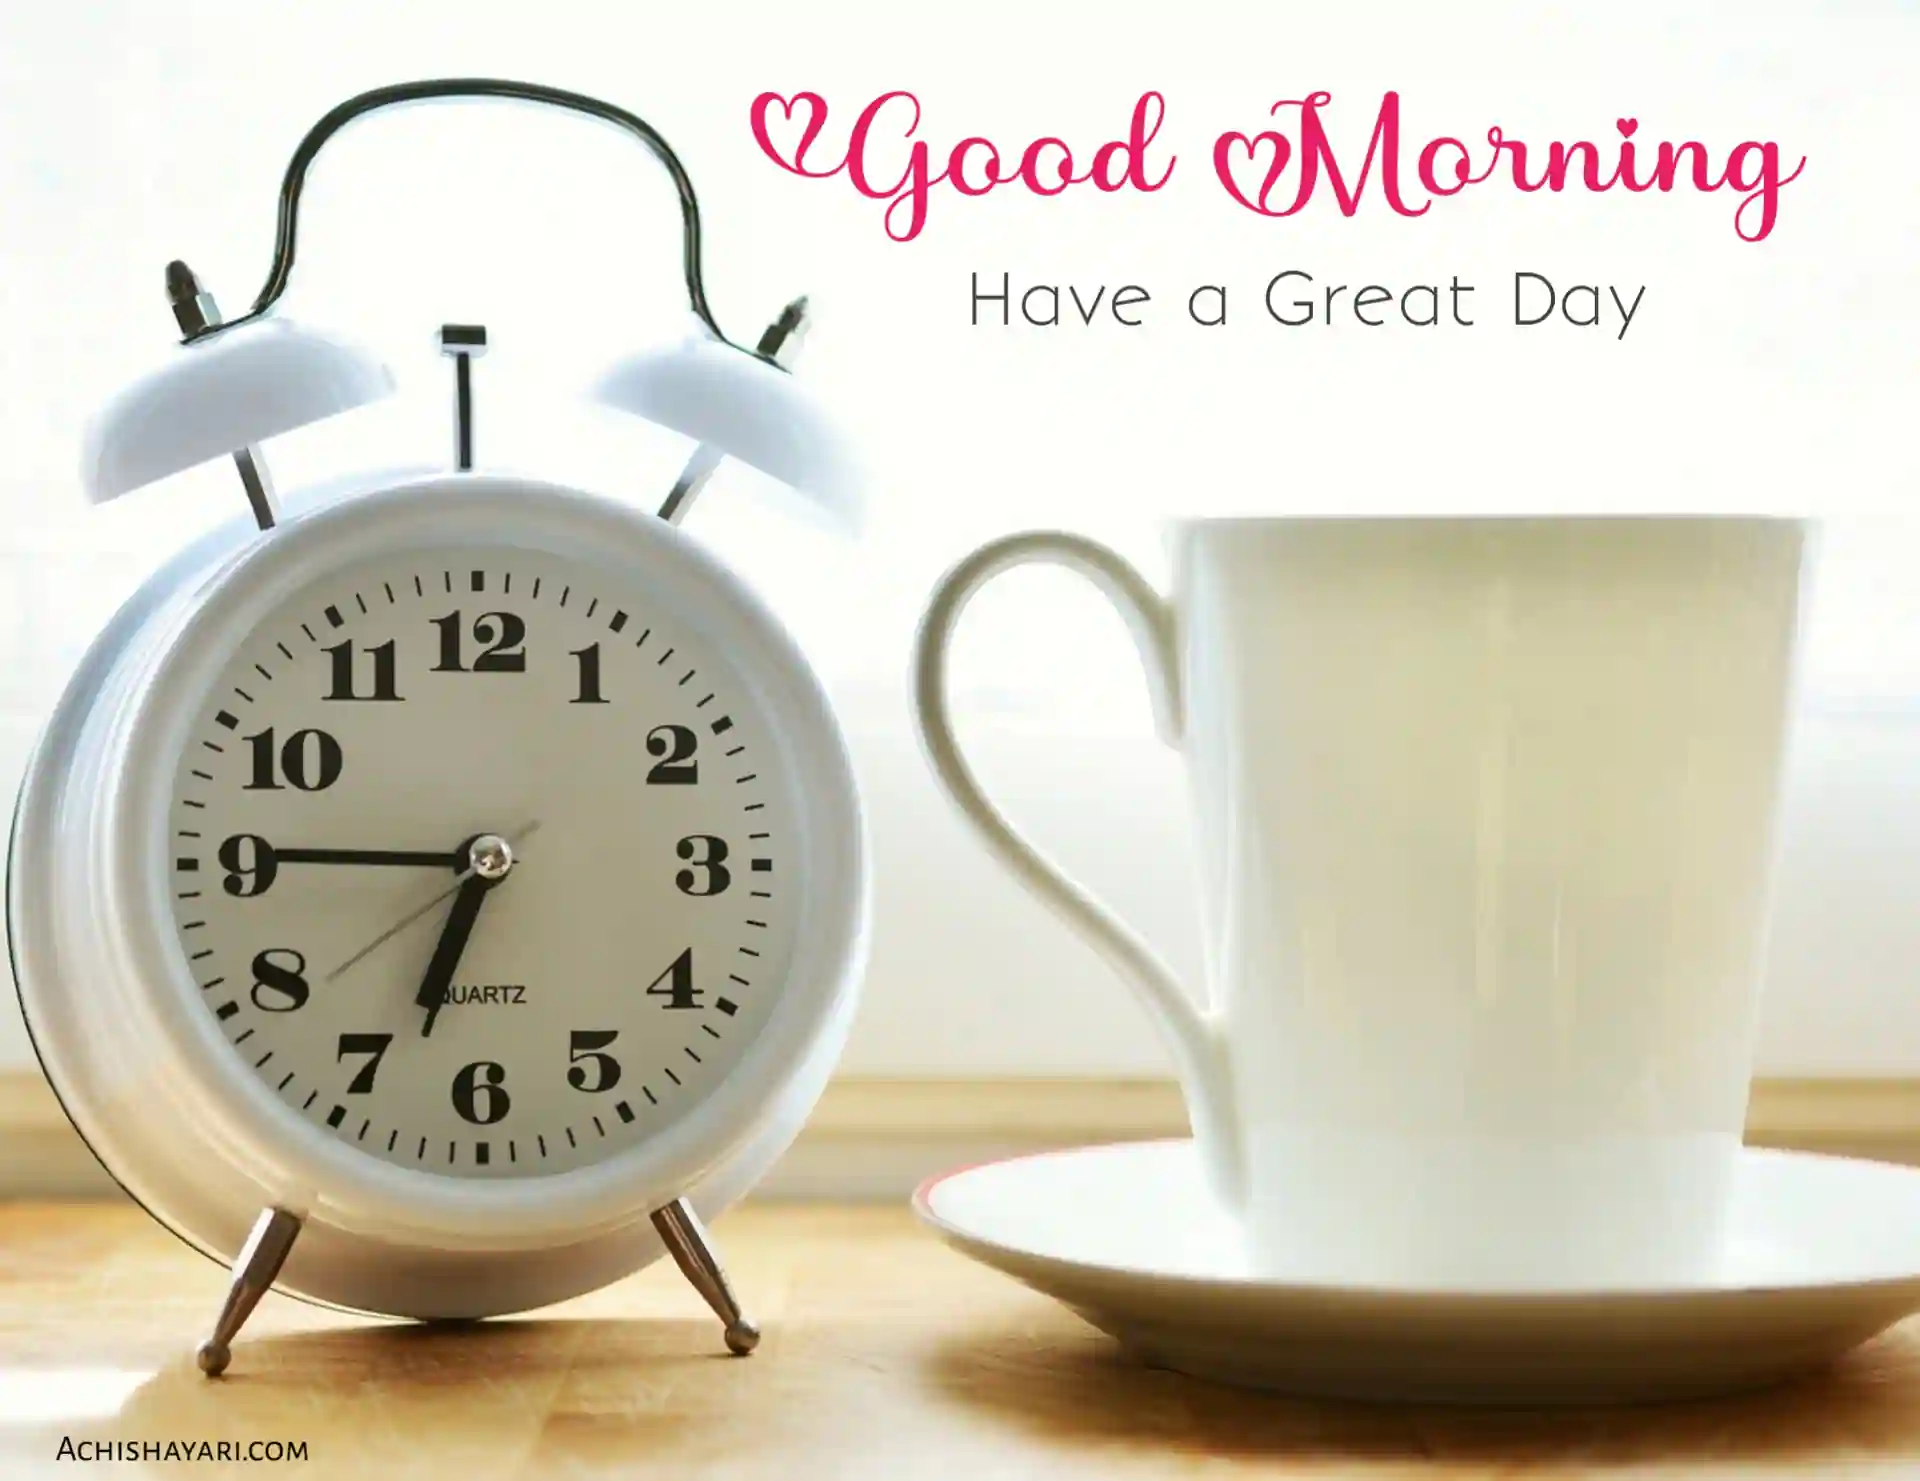 Good Morning Images With Clock